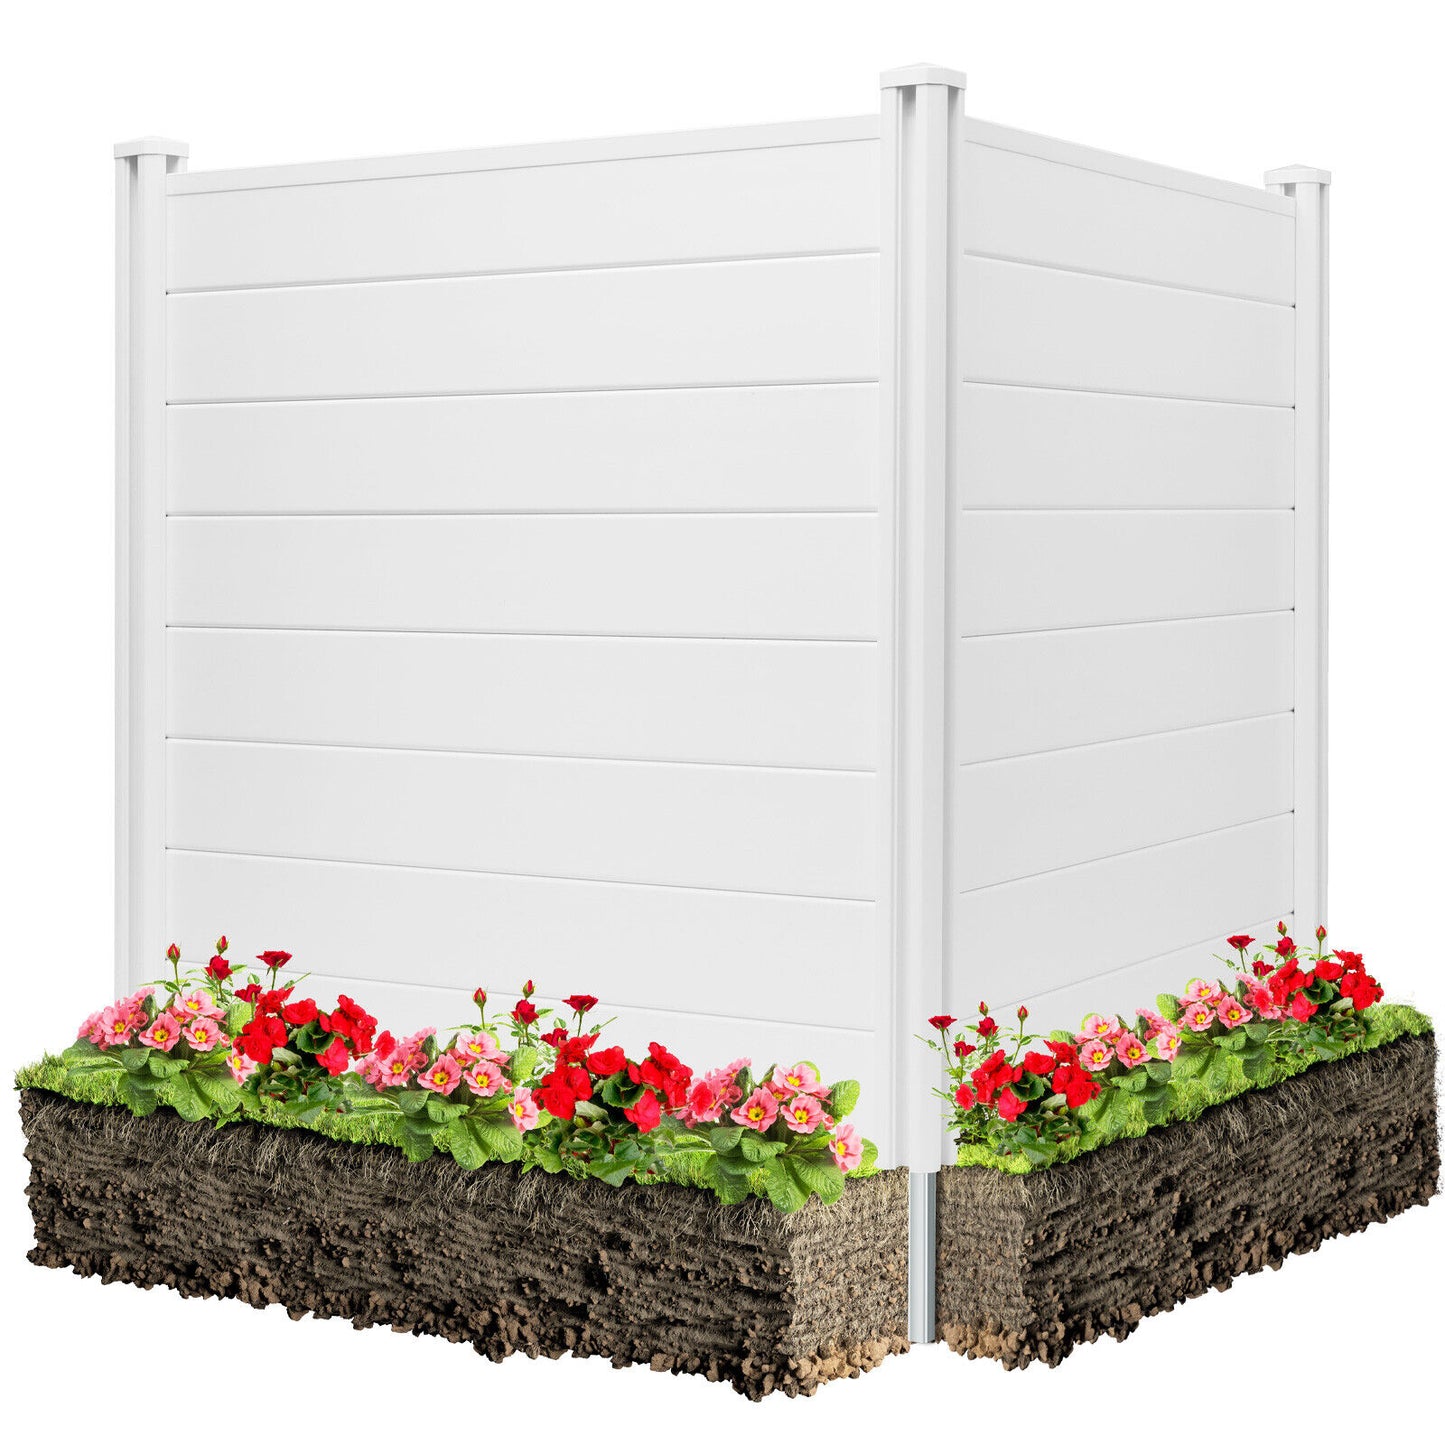 Arlopu PVC Privacy Fence Screen, 48'' x 47.2'' Outdoor Privacy Screen Enclosure for Garbage Can and Air Conditioner, 2-Panels